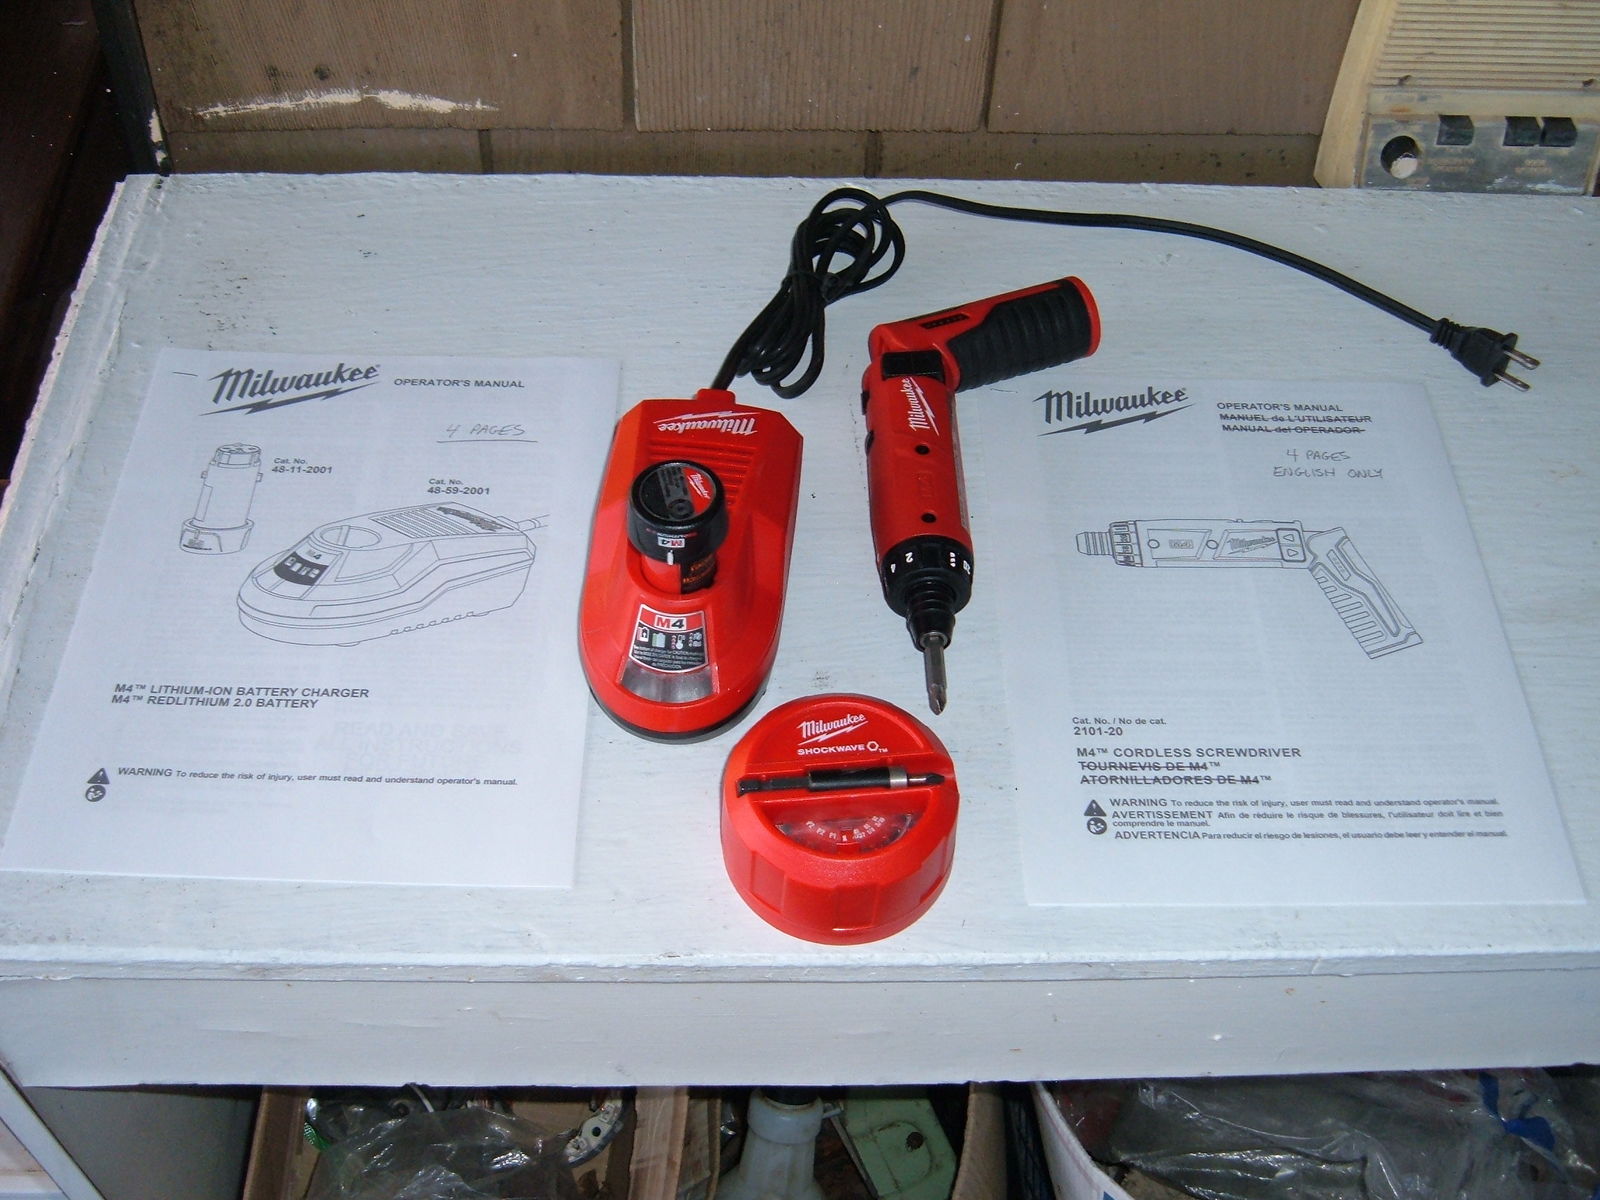 Milwaukee 2101-20 M4 used 2-speed cordless screwdriver & battery, charger & bits - $141.00